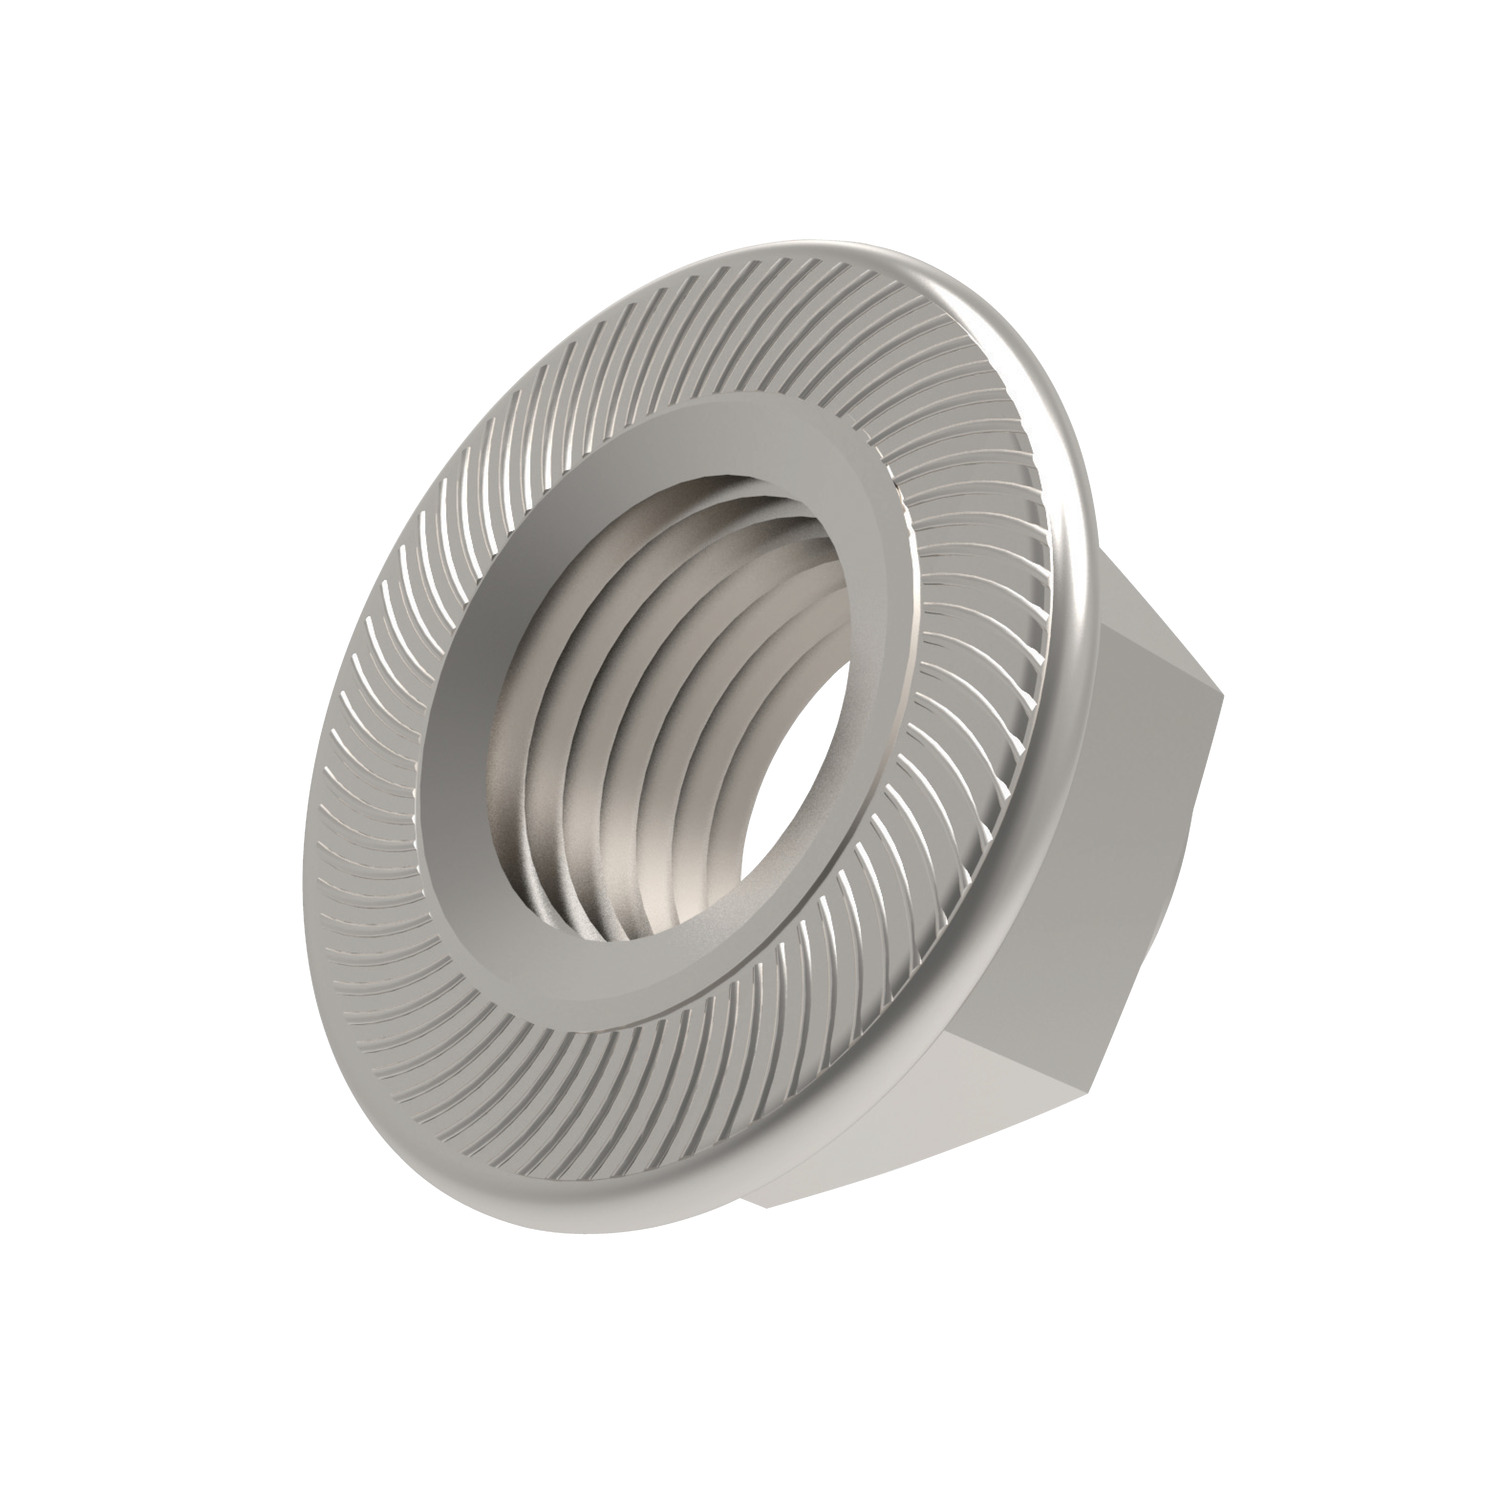 P0309.A2 - Serrated Flanged Nuts